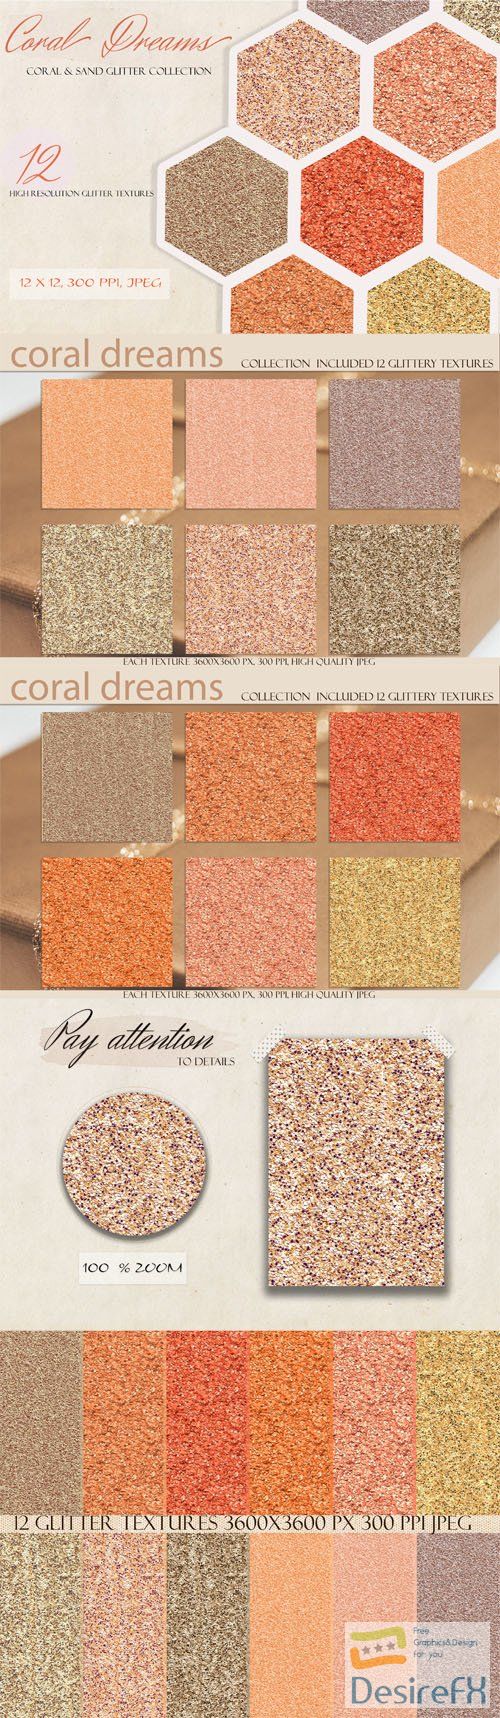 Coral Dreams - Coral & Sand Glitter Textures Collection